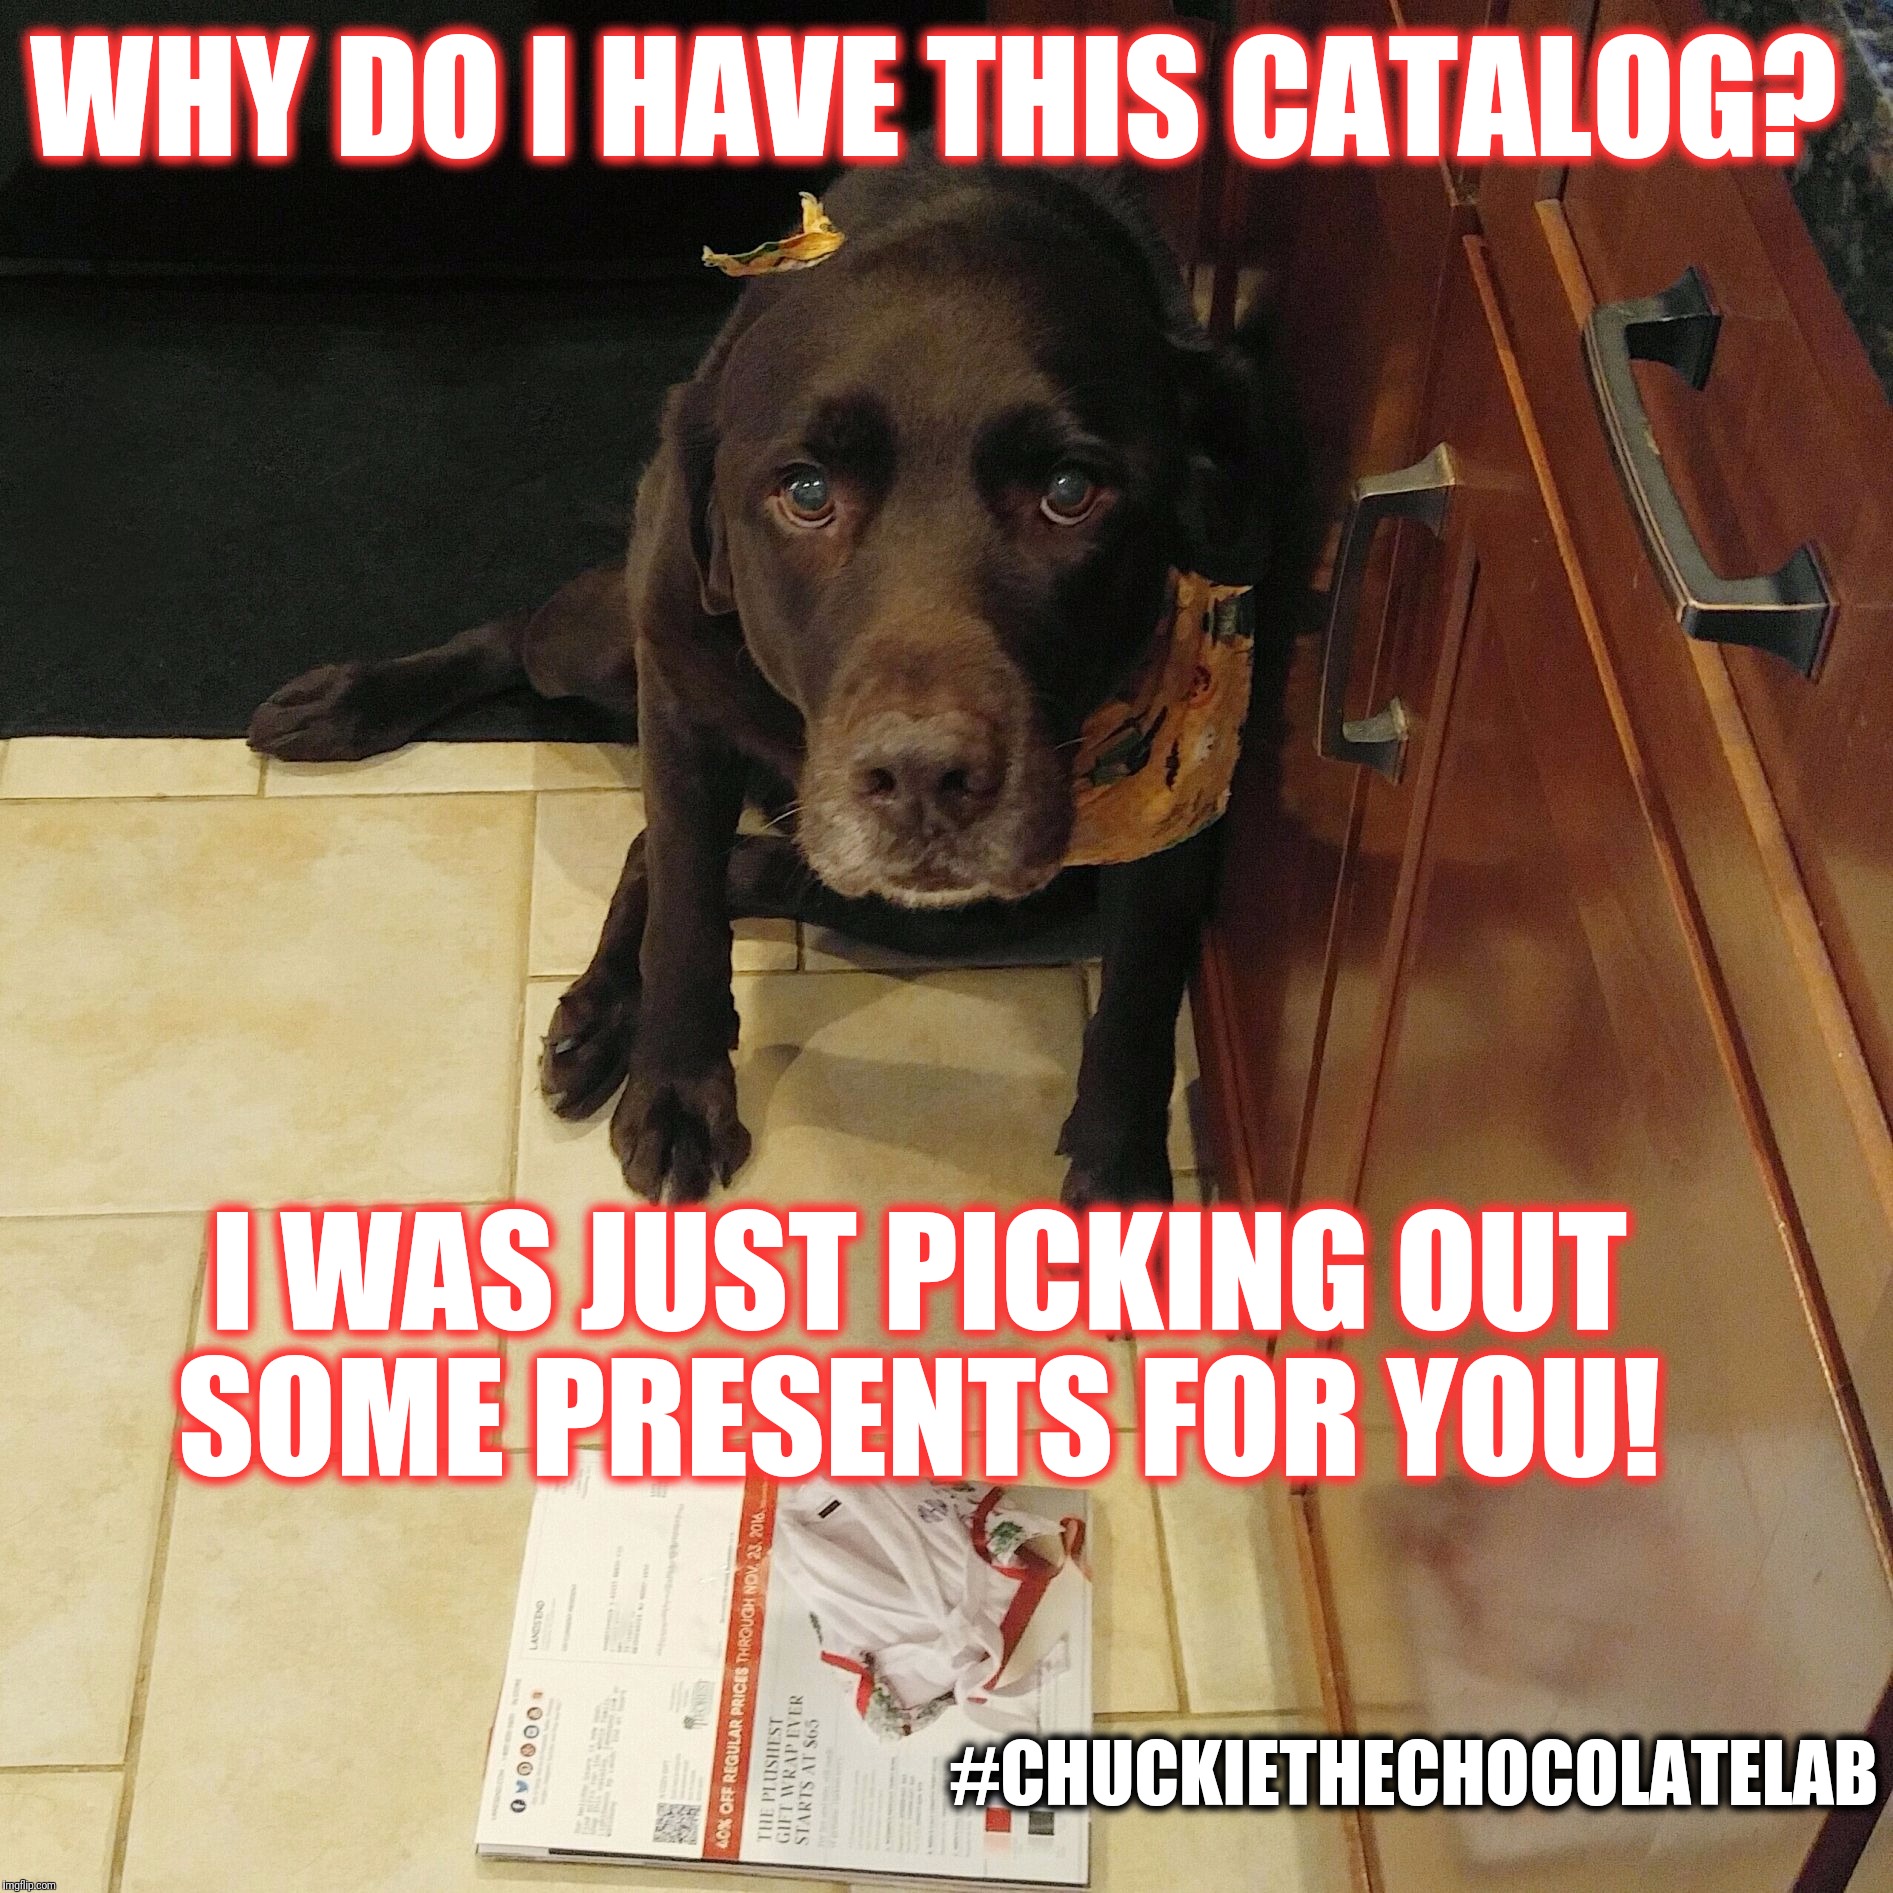 I'm just Christmas shopping!  | WHY DO I HAVE THIS CATALOG? I WAS JUST PICKING OUT SOME PRESENTS FOR YOU! #CHUCKIETHECHOCOLATELAB | image tagged in chuckie the chocolate lab,christmas,shopping,funny,dogs,bad dogs | made w/ Imgflip meme maker